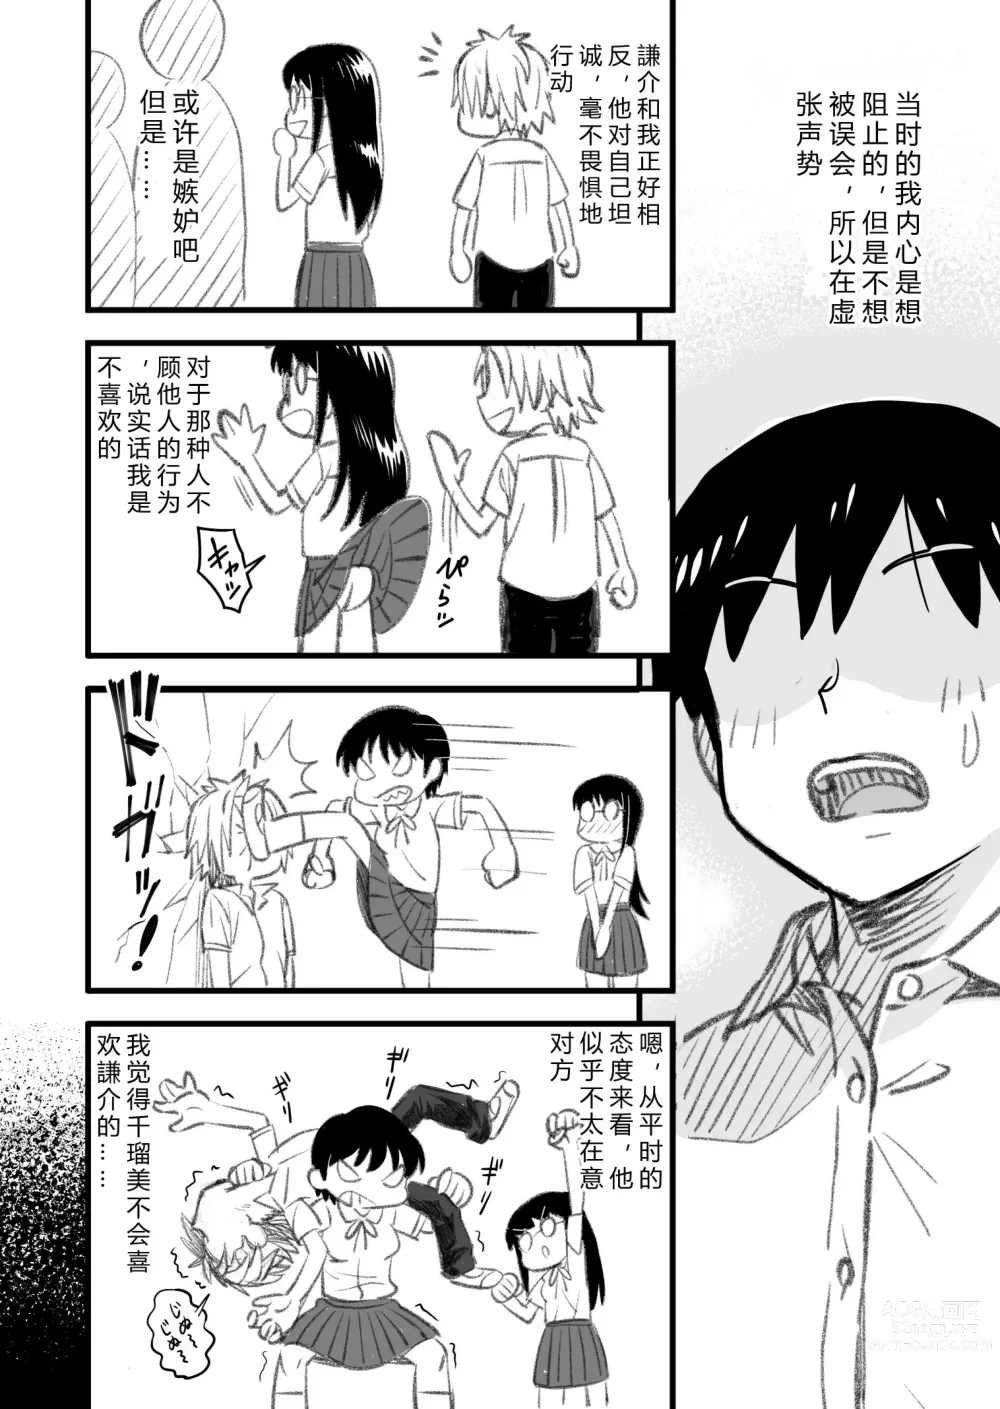 Page 12 of doujinshi How will the Protagonist's Brain be destroyed?